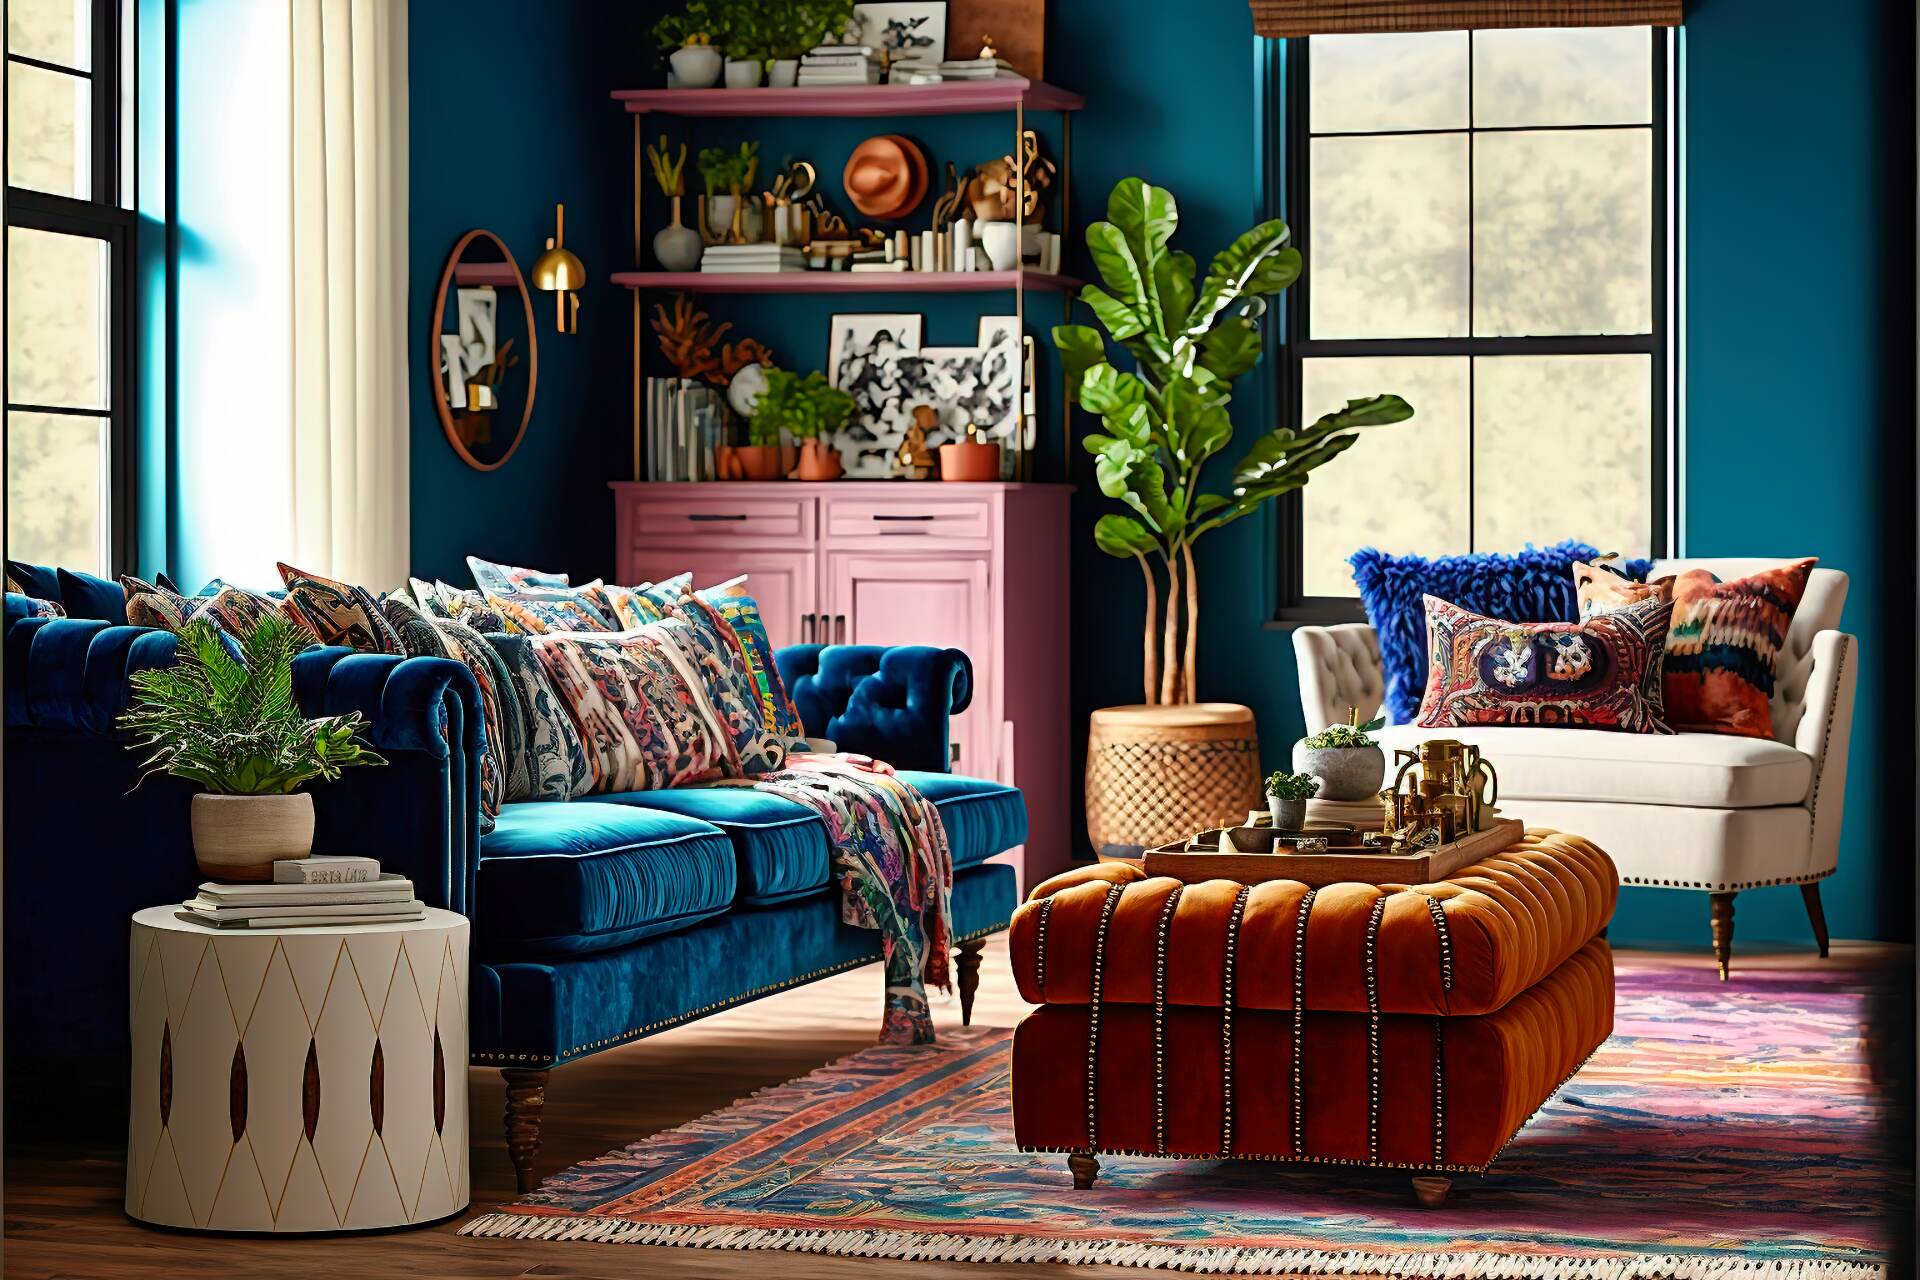 This Bohemian Living Room Is All About Global-Inspired Elegance. A Plush Velvet Sofa Sits At The Center Of The Space, While A Mix Of Vintage And Modern Furniture Pieces Add A Sense Of Eclecticism. A Colorful Woven Rug Anchors The Space, While A Collection Of Global-Inspired Art And Textiles Add A Touch Of Wanderlust.